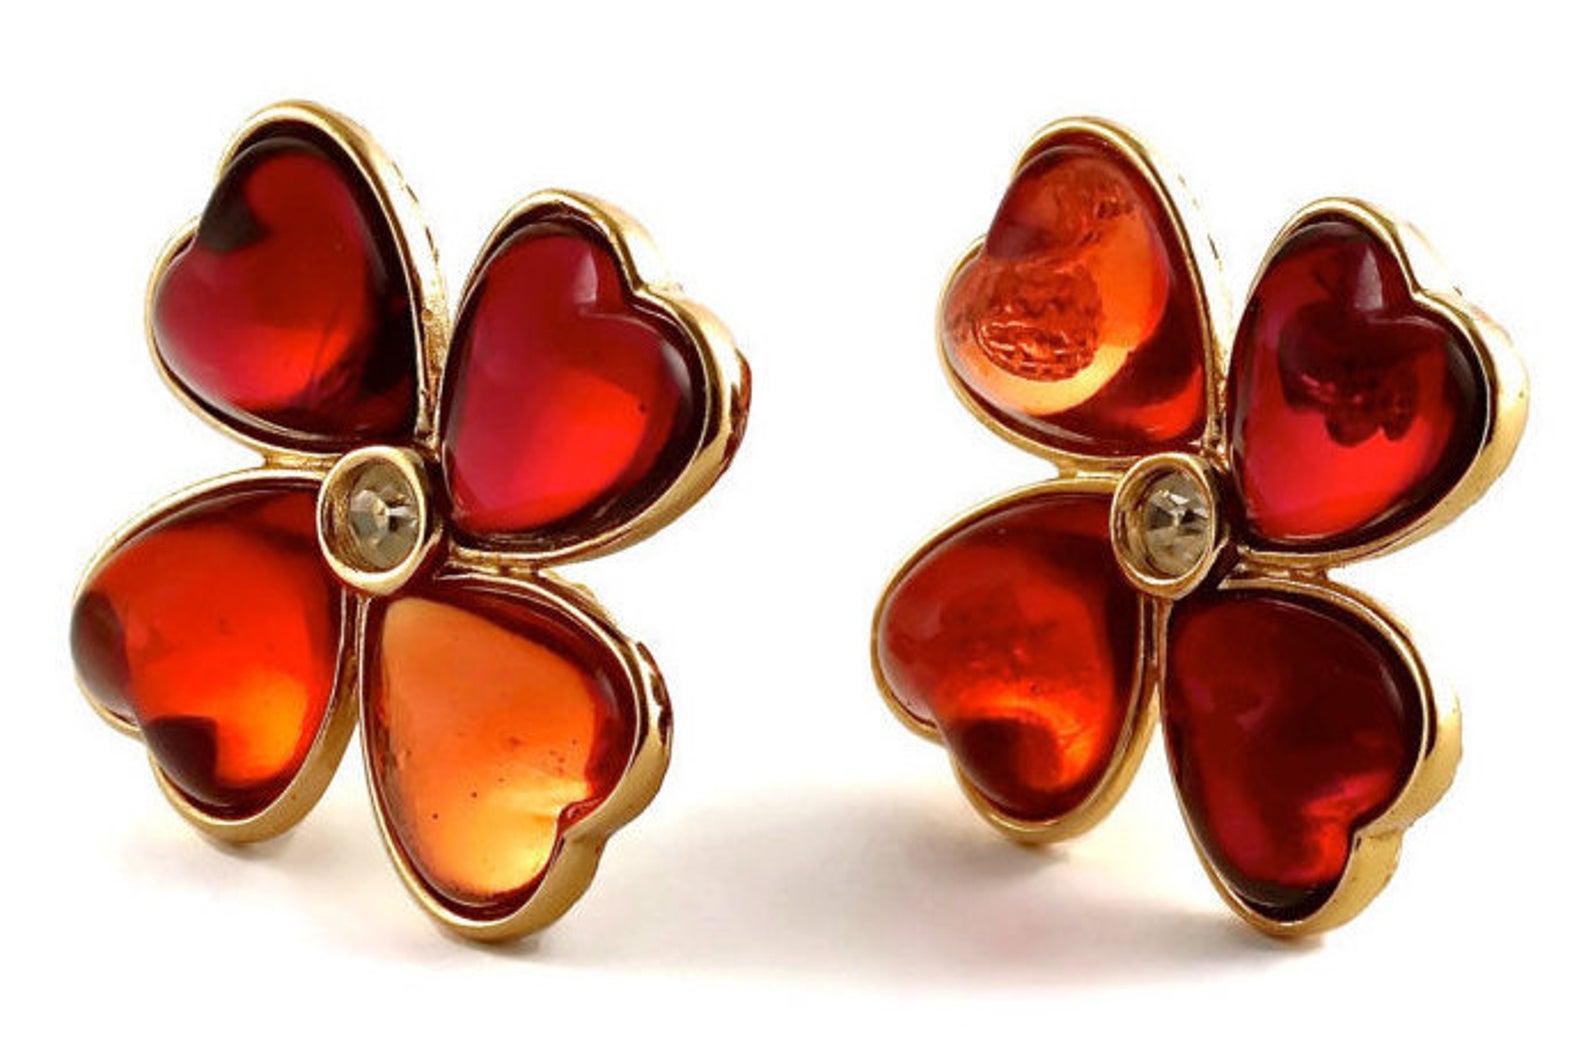 Vintage YSL Yves Saint Laurent Heart Clover Resin Earrings

Measurements:
Height: 1 4/8 inches (3.81 cm)
Width: 1 4/8 inches (3.81 cm)

Features:
- 100% Authentic YVES SAINT LAURENT.
- Plump heart shape forming a 4 leaf clover.
- Ruby and amber